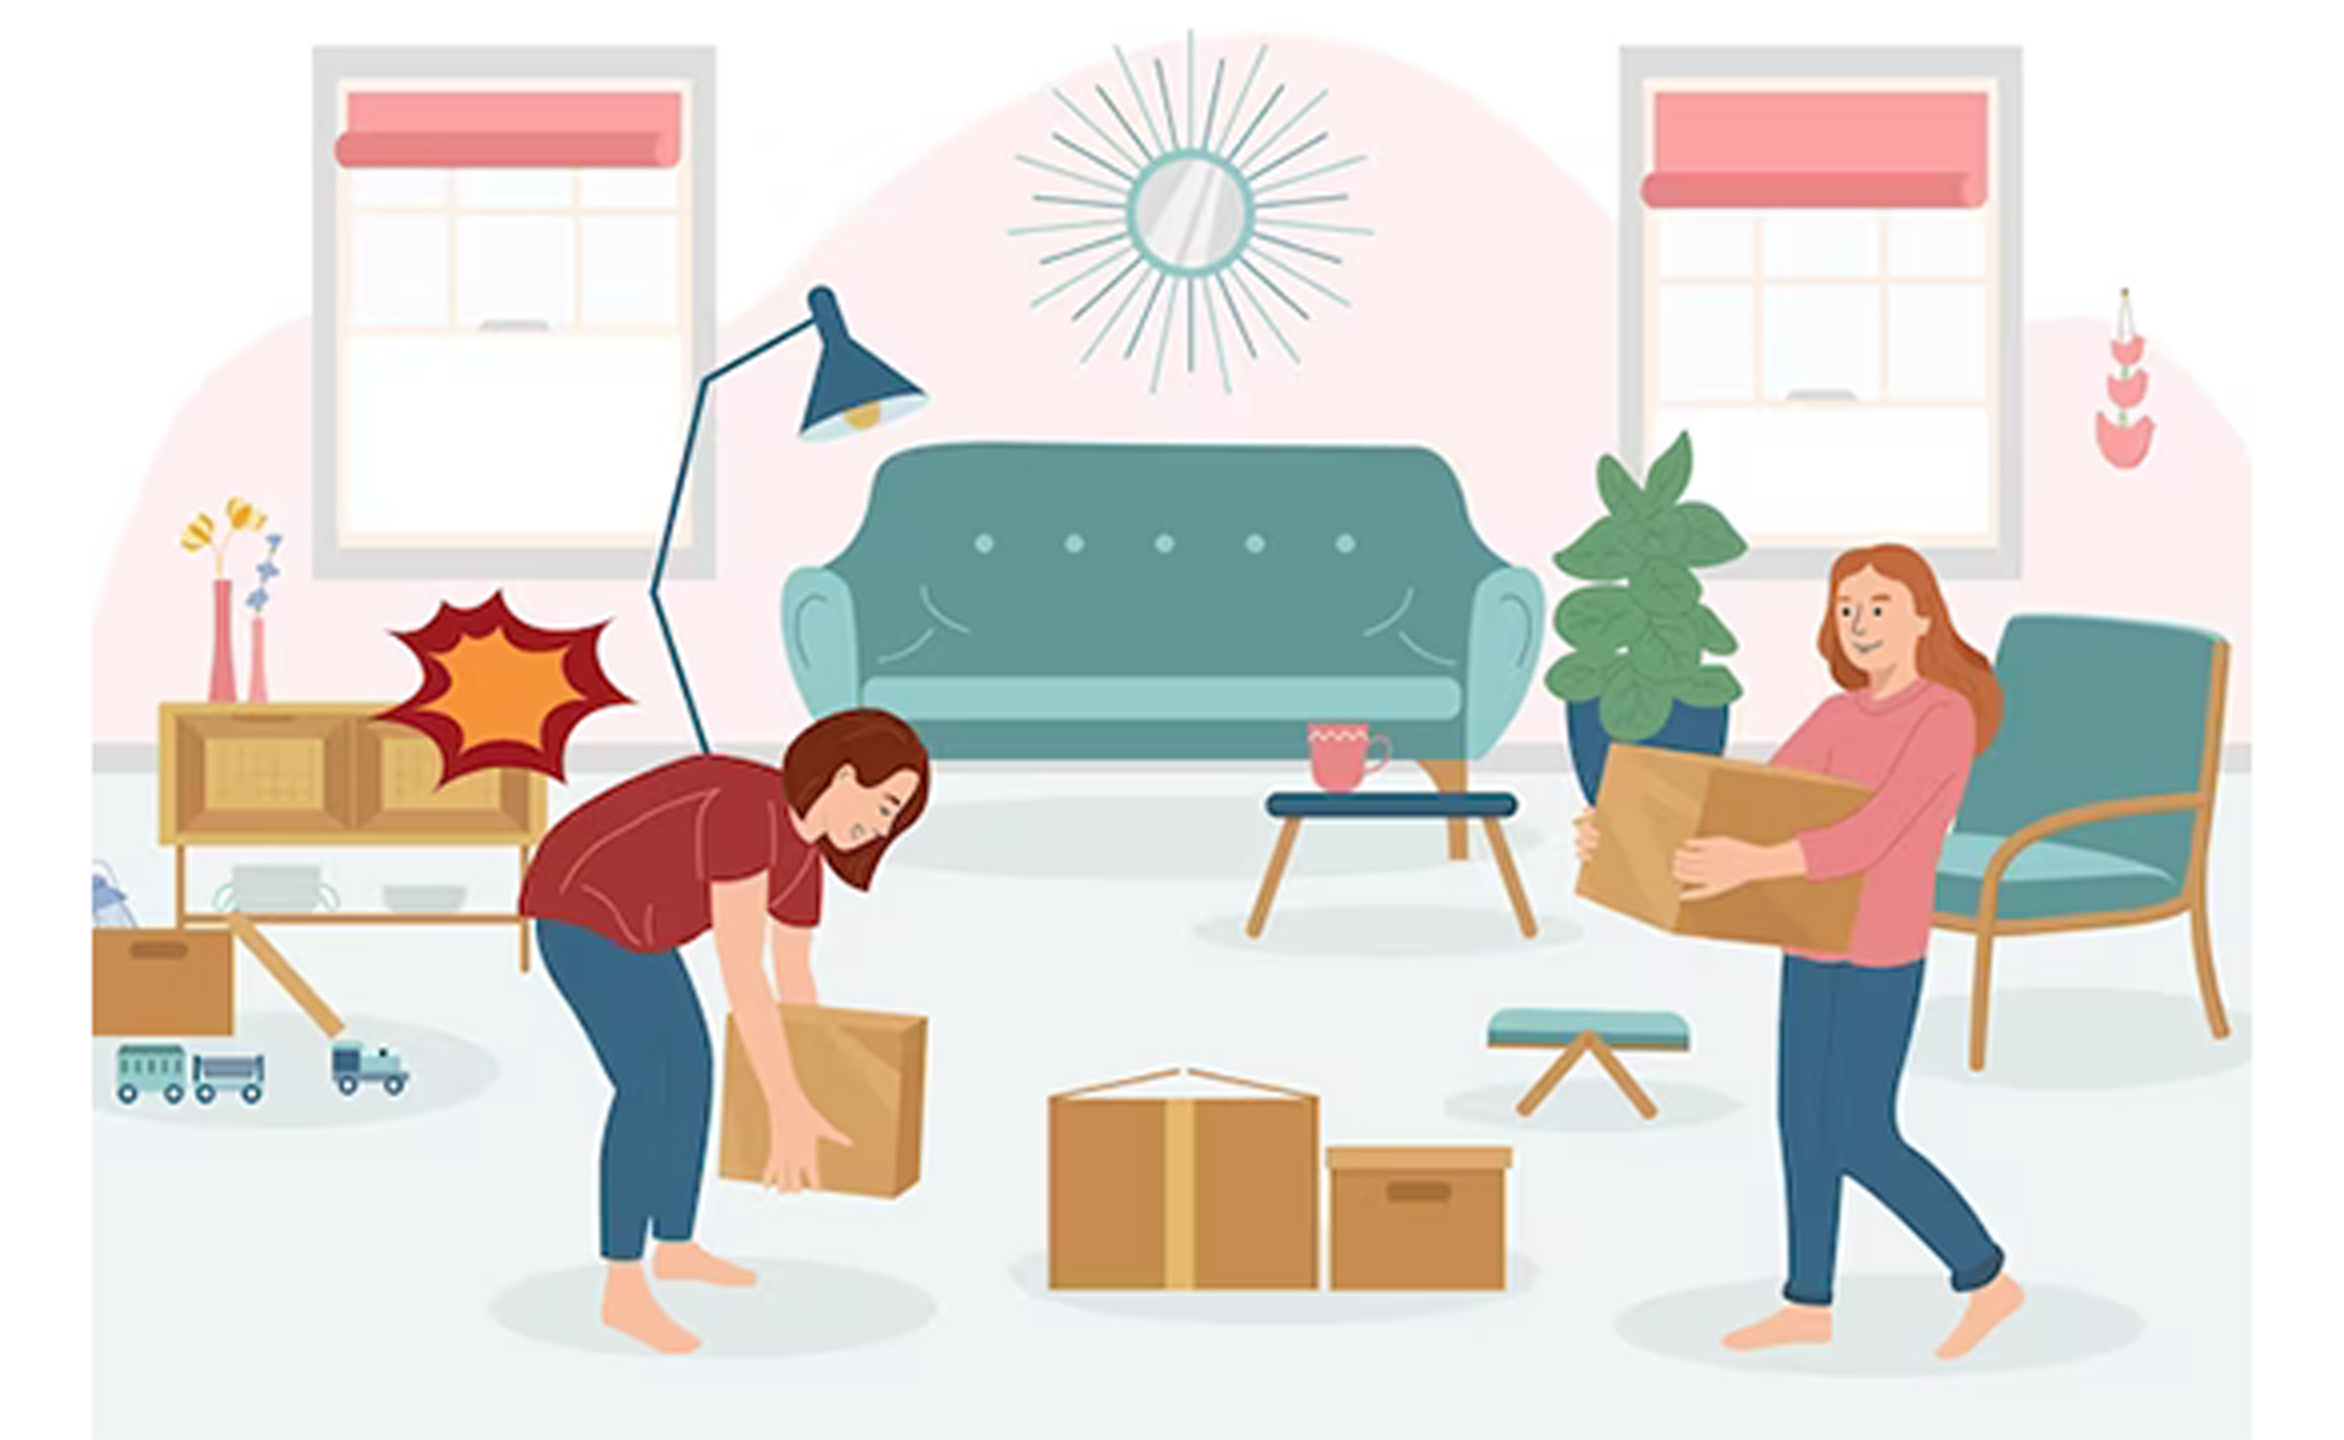 5 Must-Keep Items When Moving